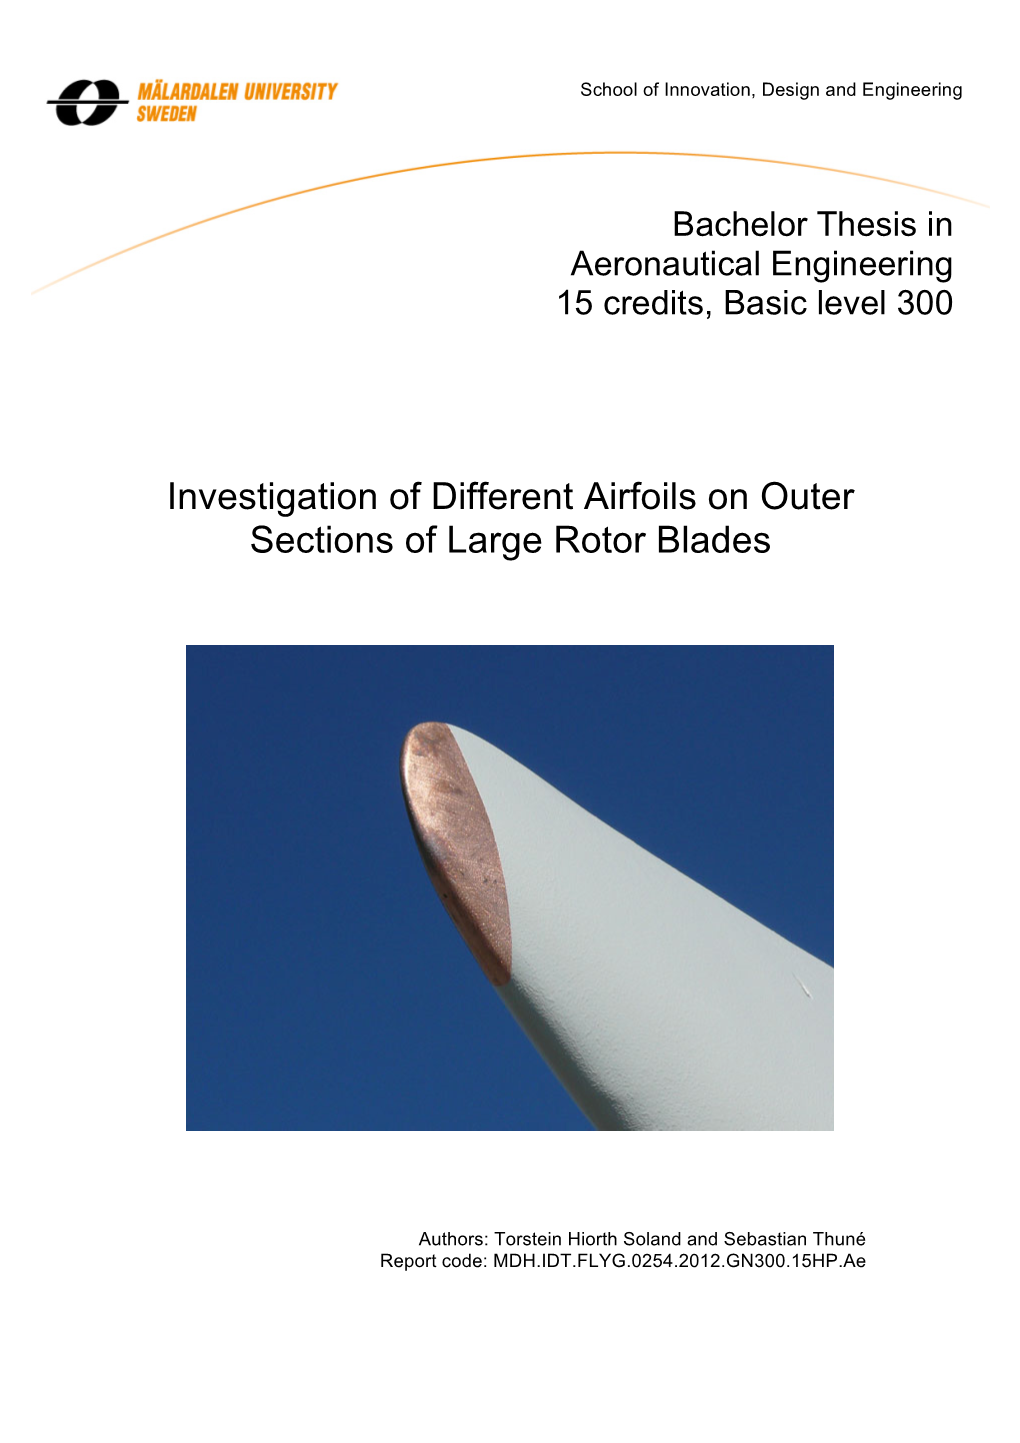 Investigation of Different Airfoils on Outer Sections of Large Rotor Blades